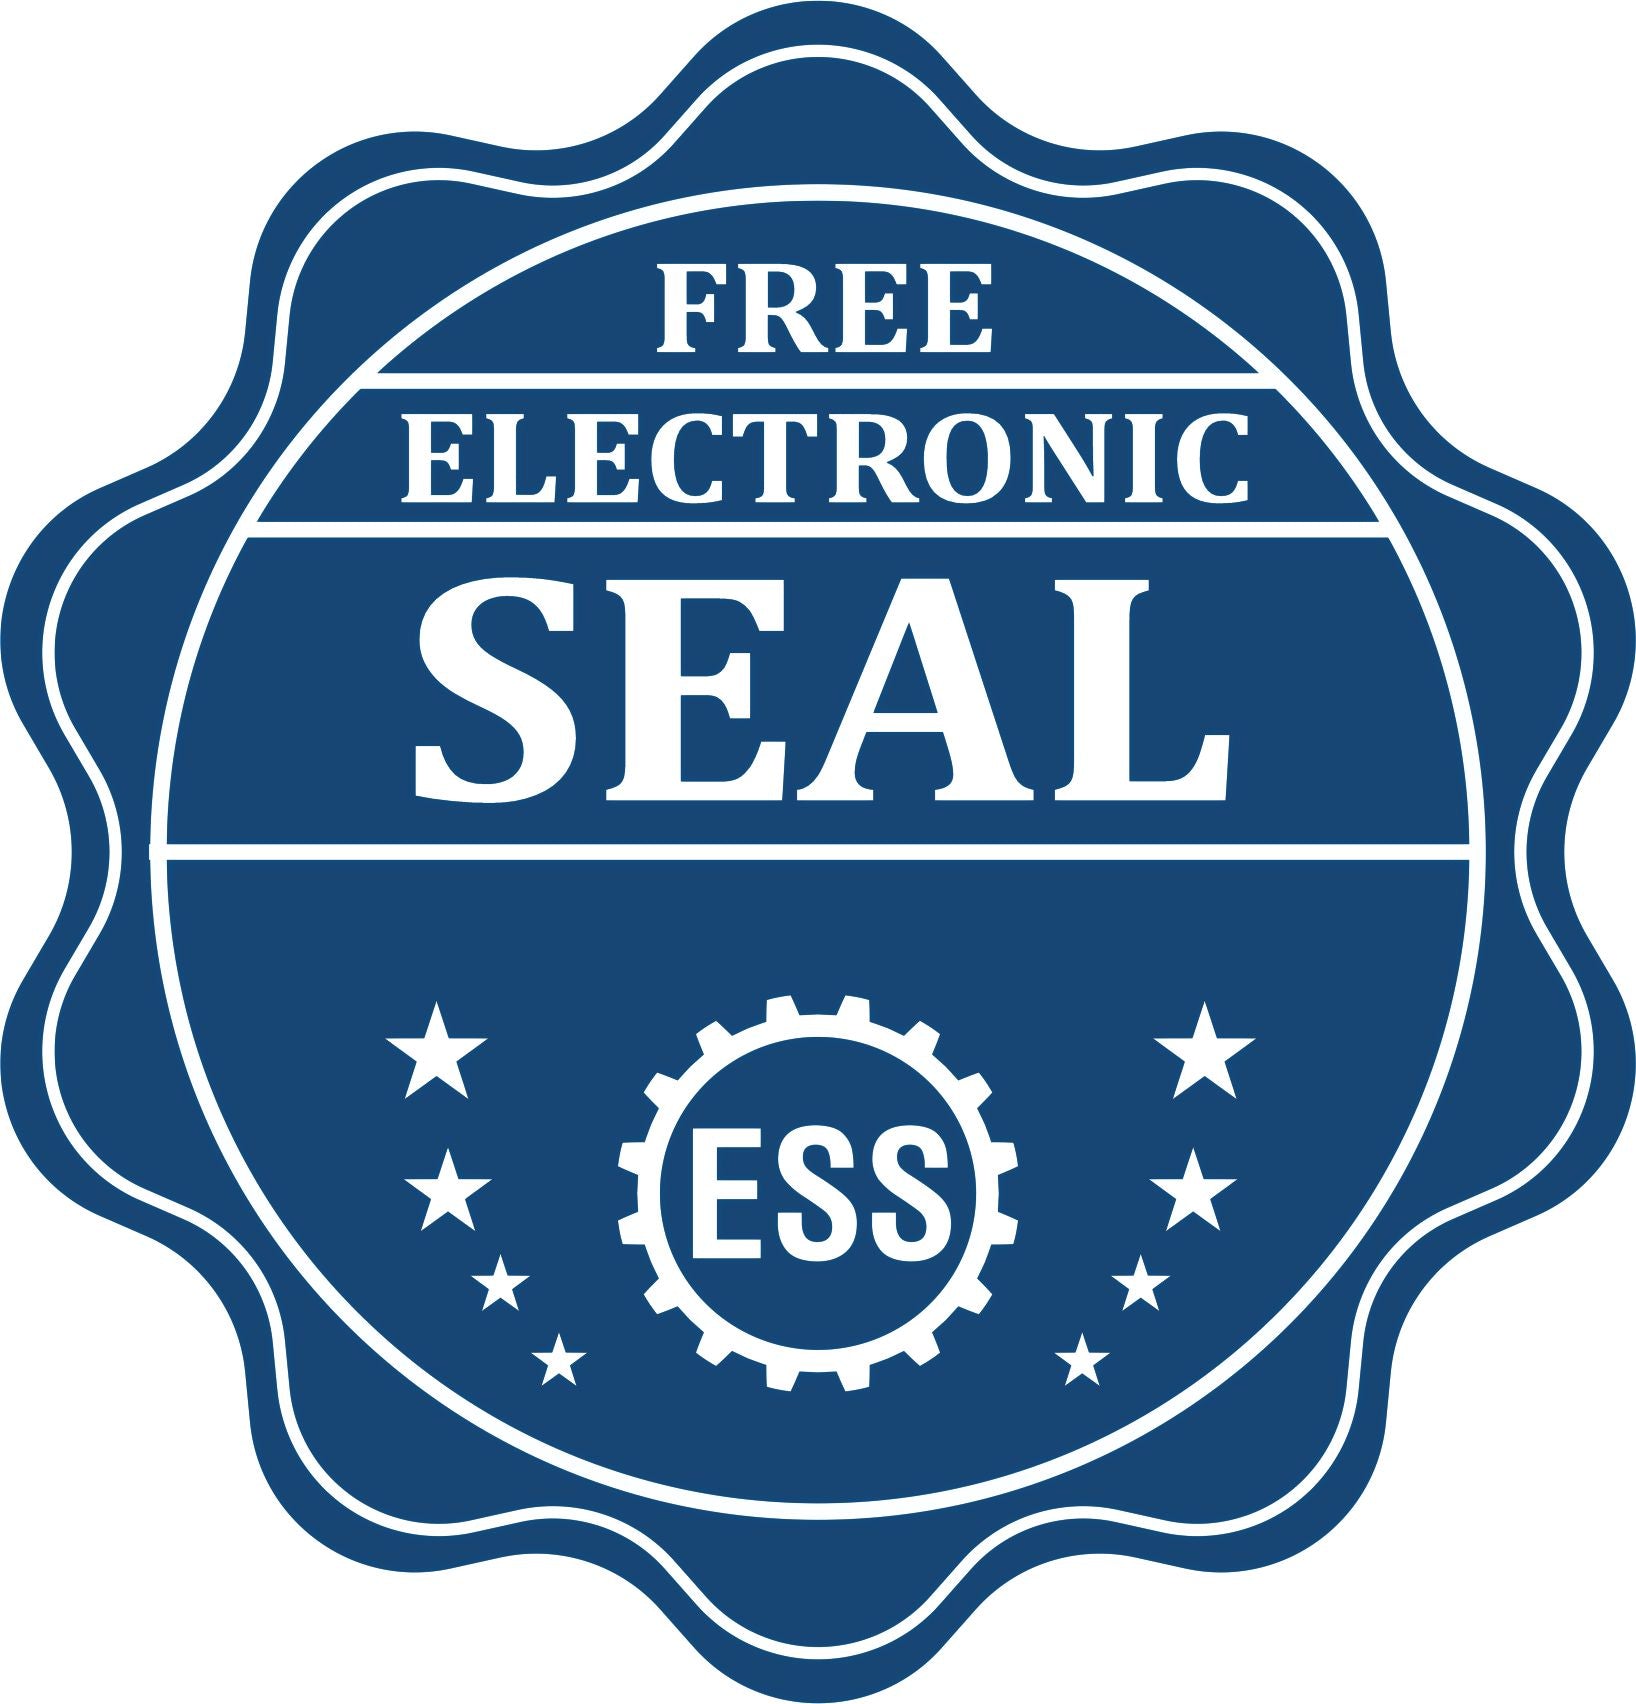 A badge showing a free electronic seal for the Heavy Duty Cast Iron Michigan Geologist Seal Embosser with stars and the ESS gear on the emblem.